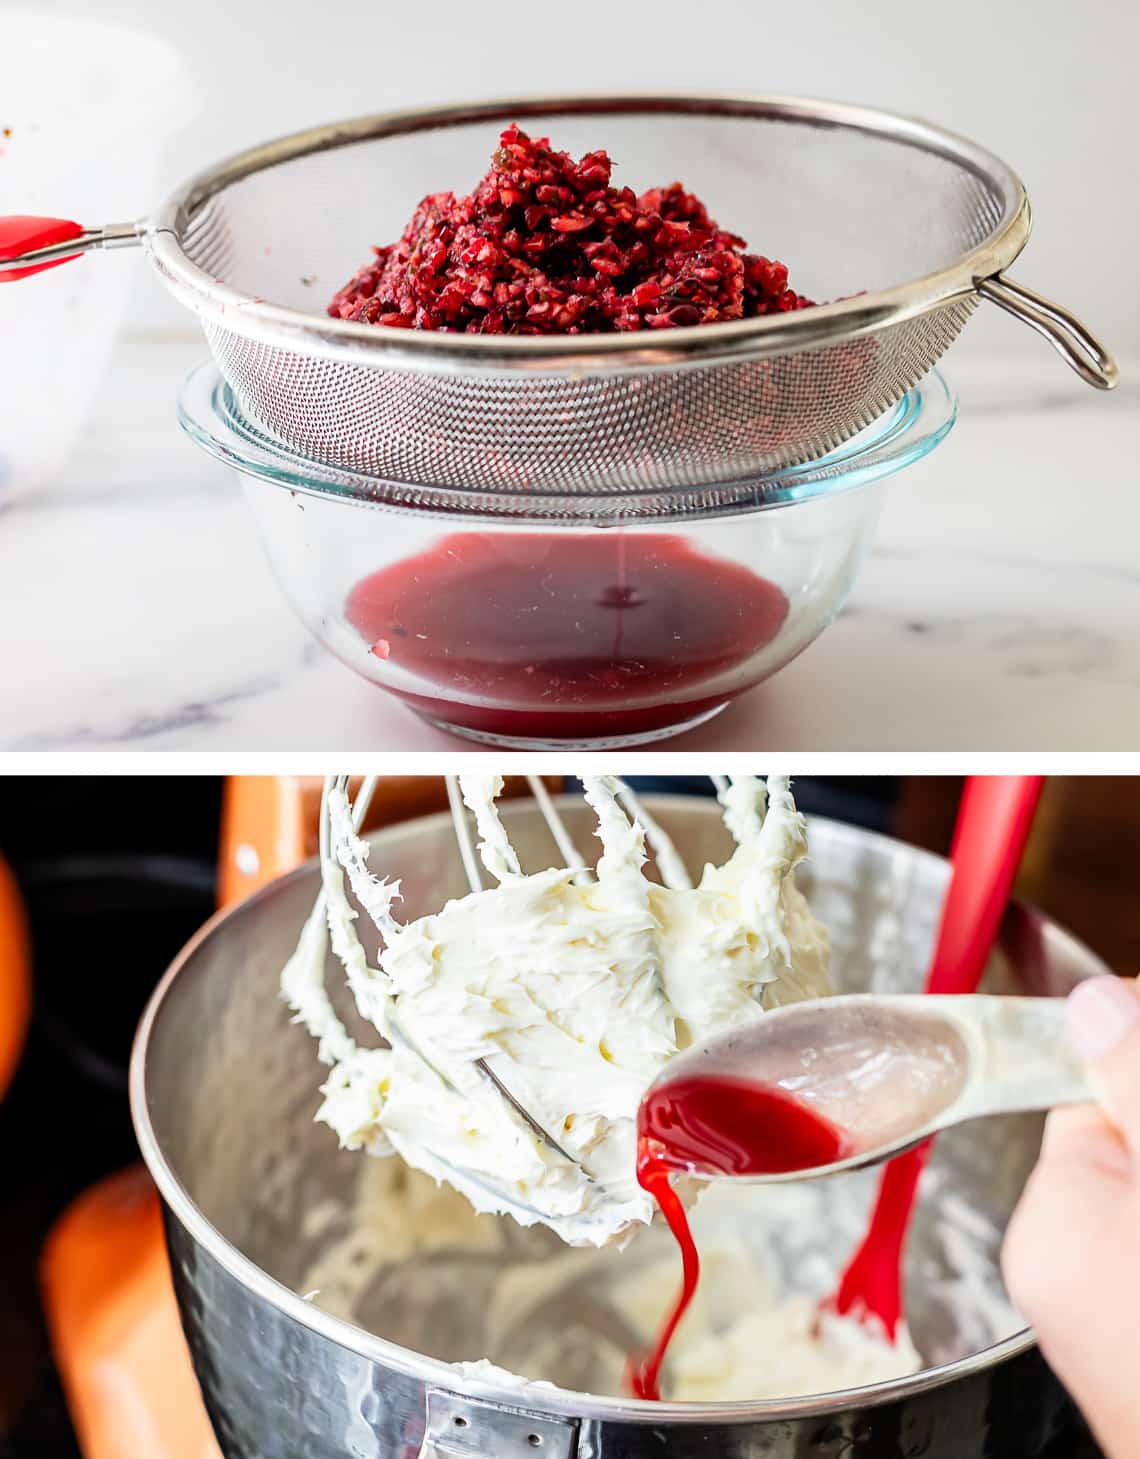 straining chopped cranberry dip to remove excess juice and adding juice to whipped cream cheese.